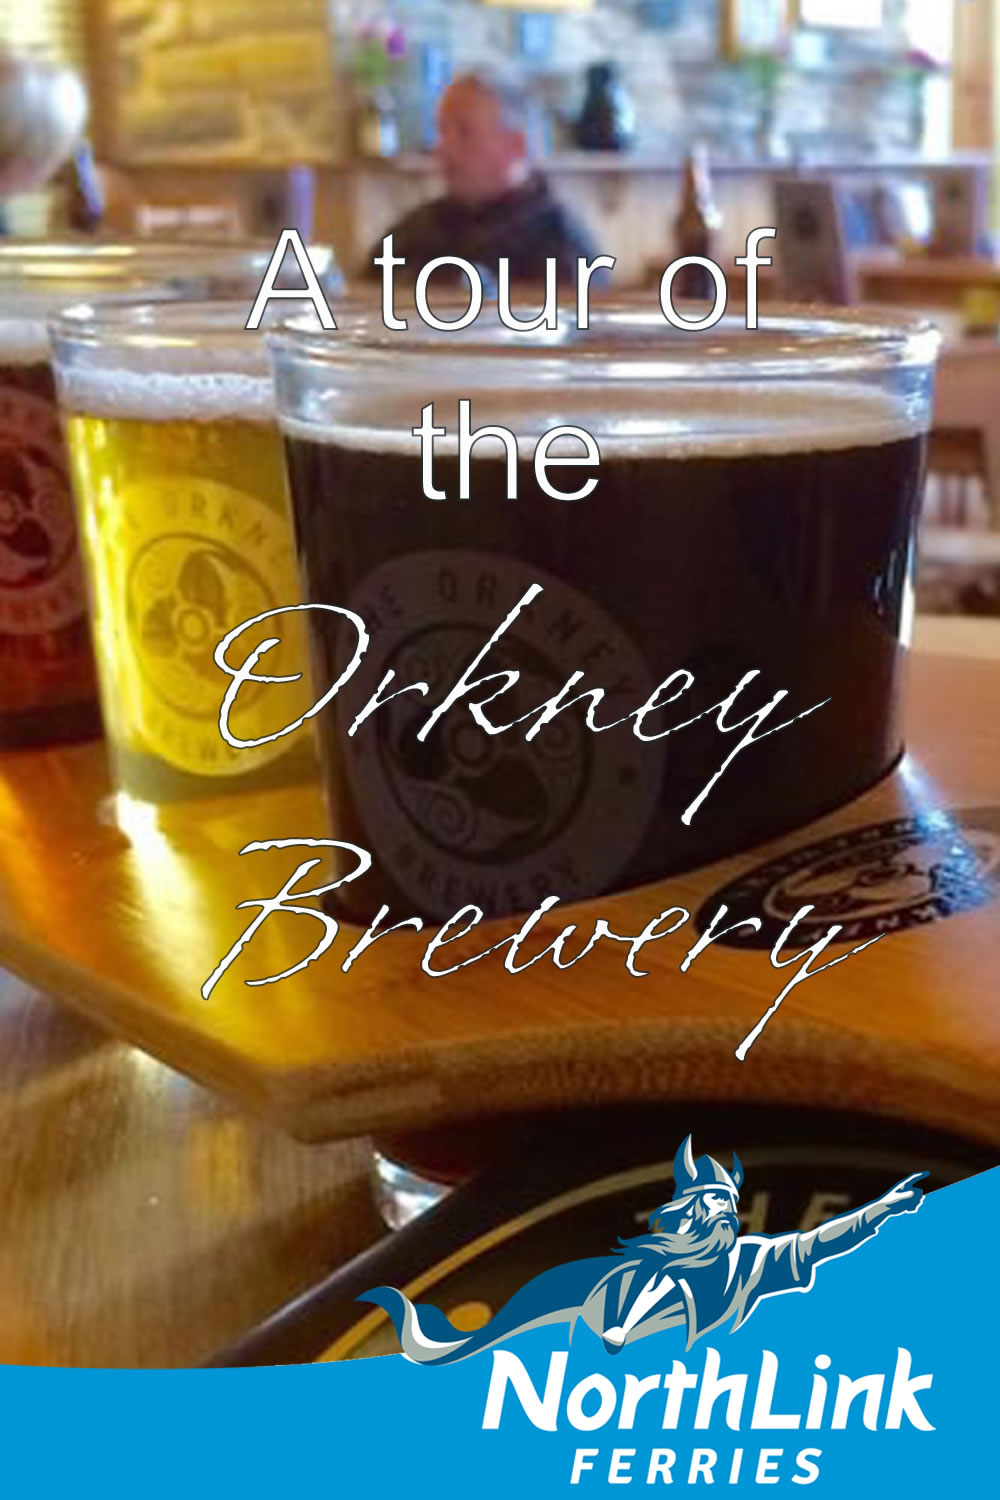 A tour of the Orkney Brewery